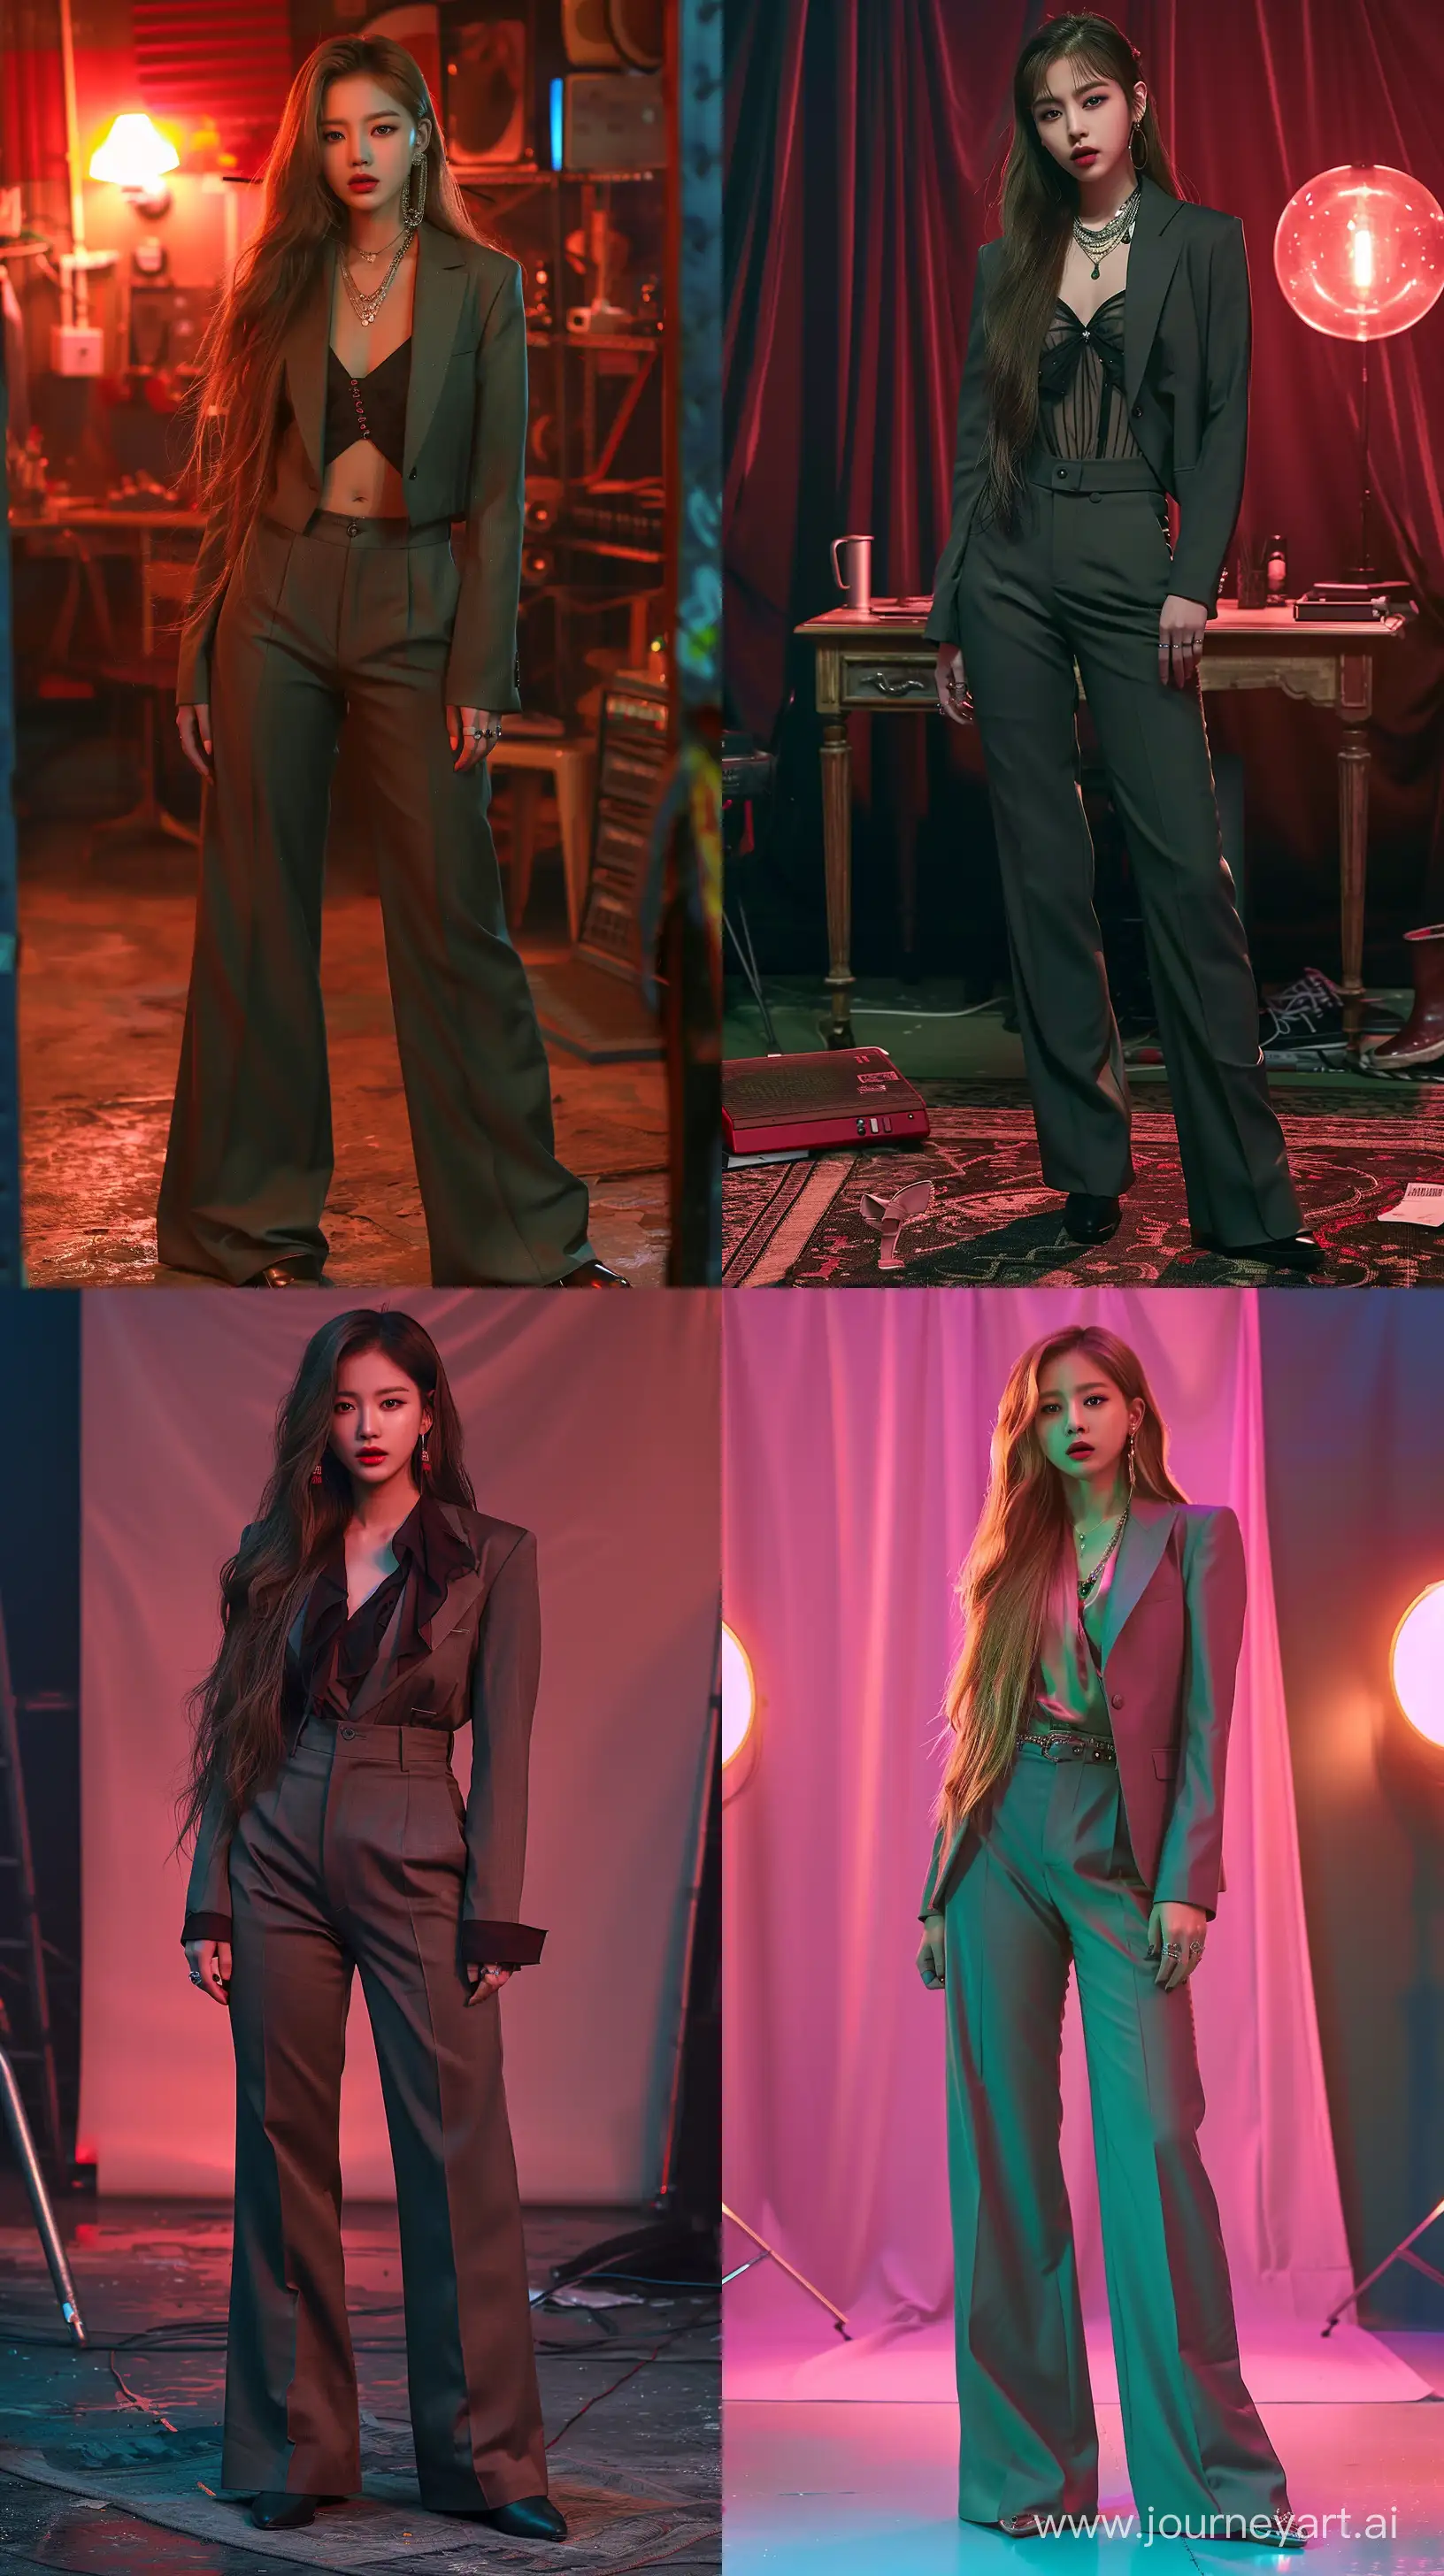 Jennie-Blackpinks-Mysterious-Nocturnal-Fashion-Casual-Elegance-in-a-Creepy-Studio-Set